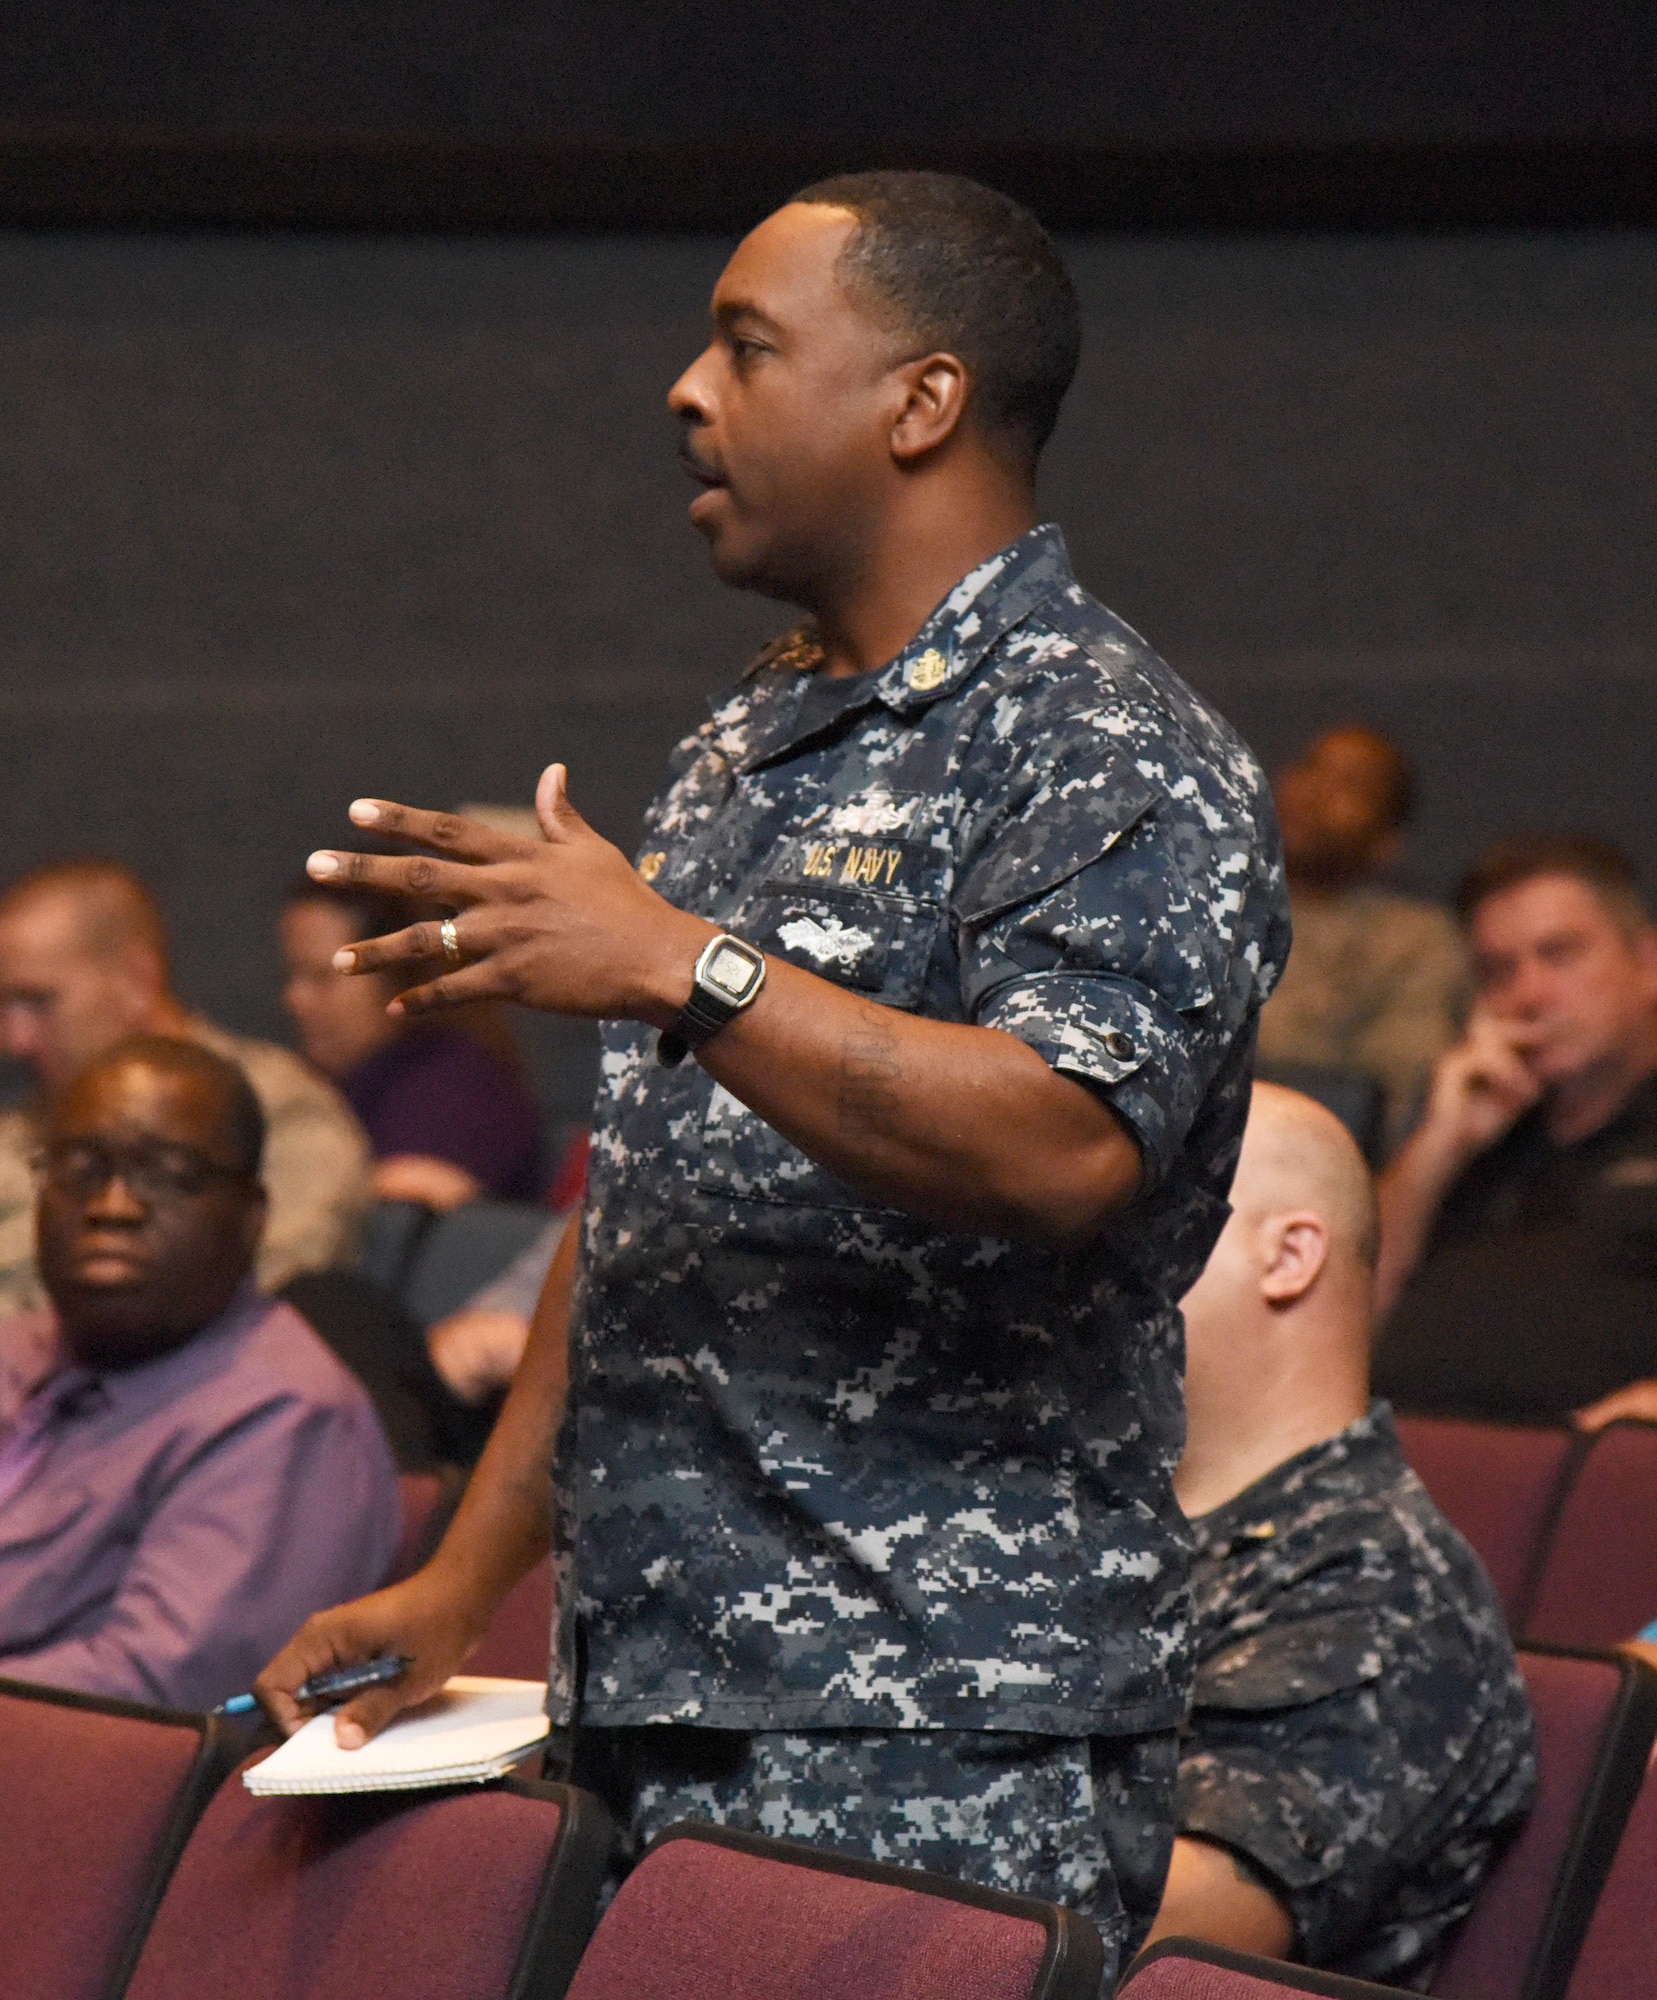 U.S. Navy Chief Petty Officer Andre Syas, Center for Naval Aviation Technical Training Unit Keesler facility manager, asks questions during the Base Operations Support town hall meeting at the Welch Theater July 26, 2017, on Keesler Air Force Base, Miss. The meeting was to discuss the new base operations support contract revisions. (U.S. Air force photo by Kemberly Groue)